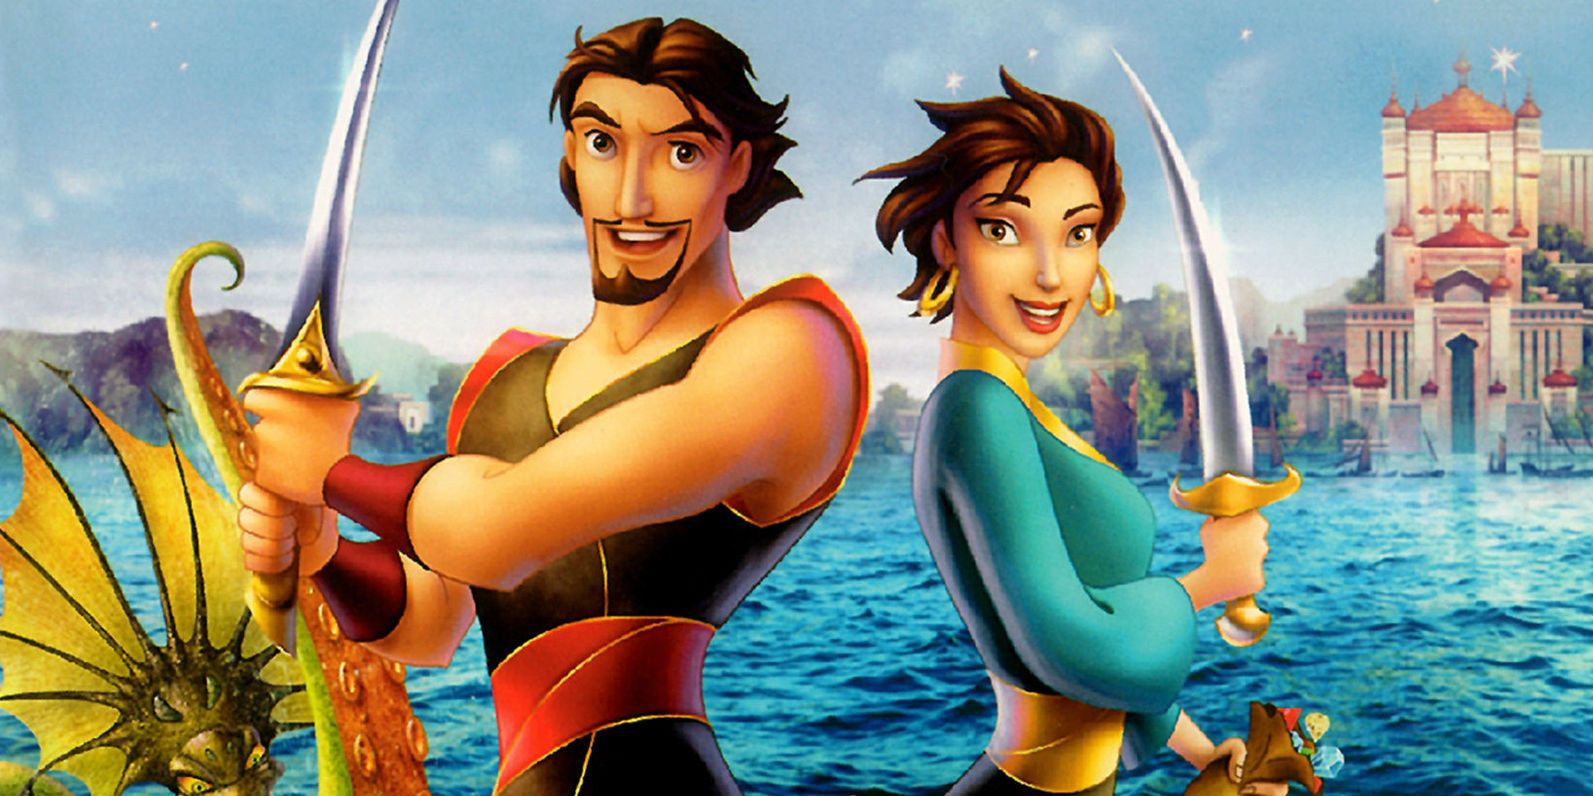 Image of Sinbad: Legend of the Seven Seas with characters holding swords and smiling.